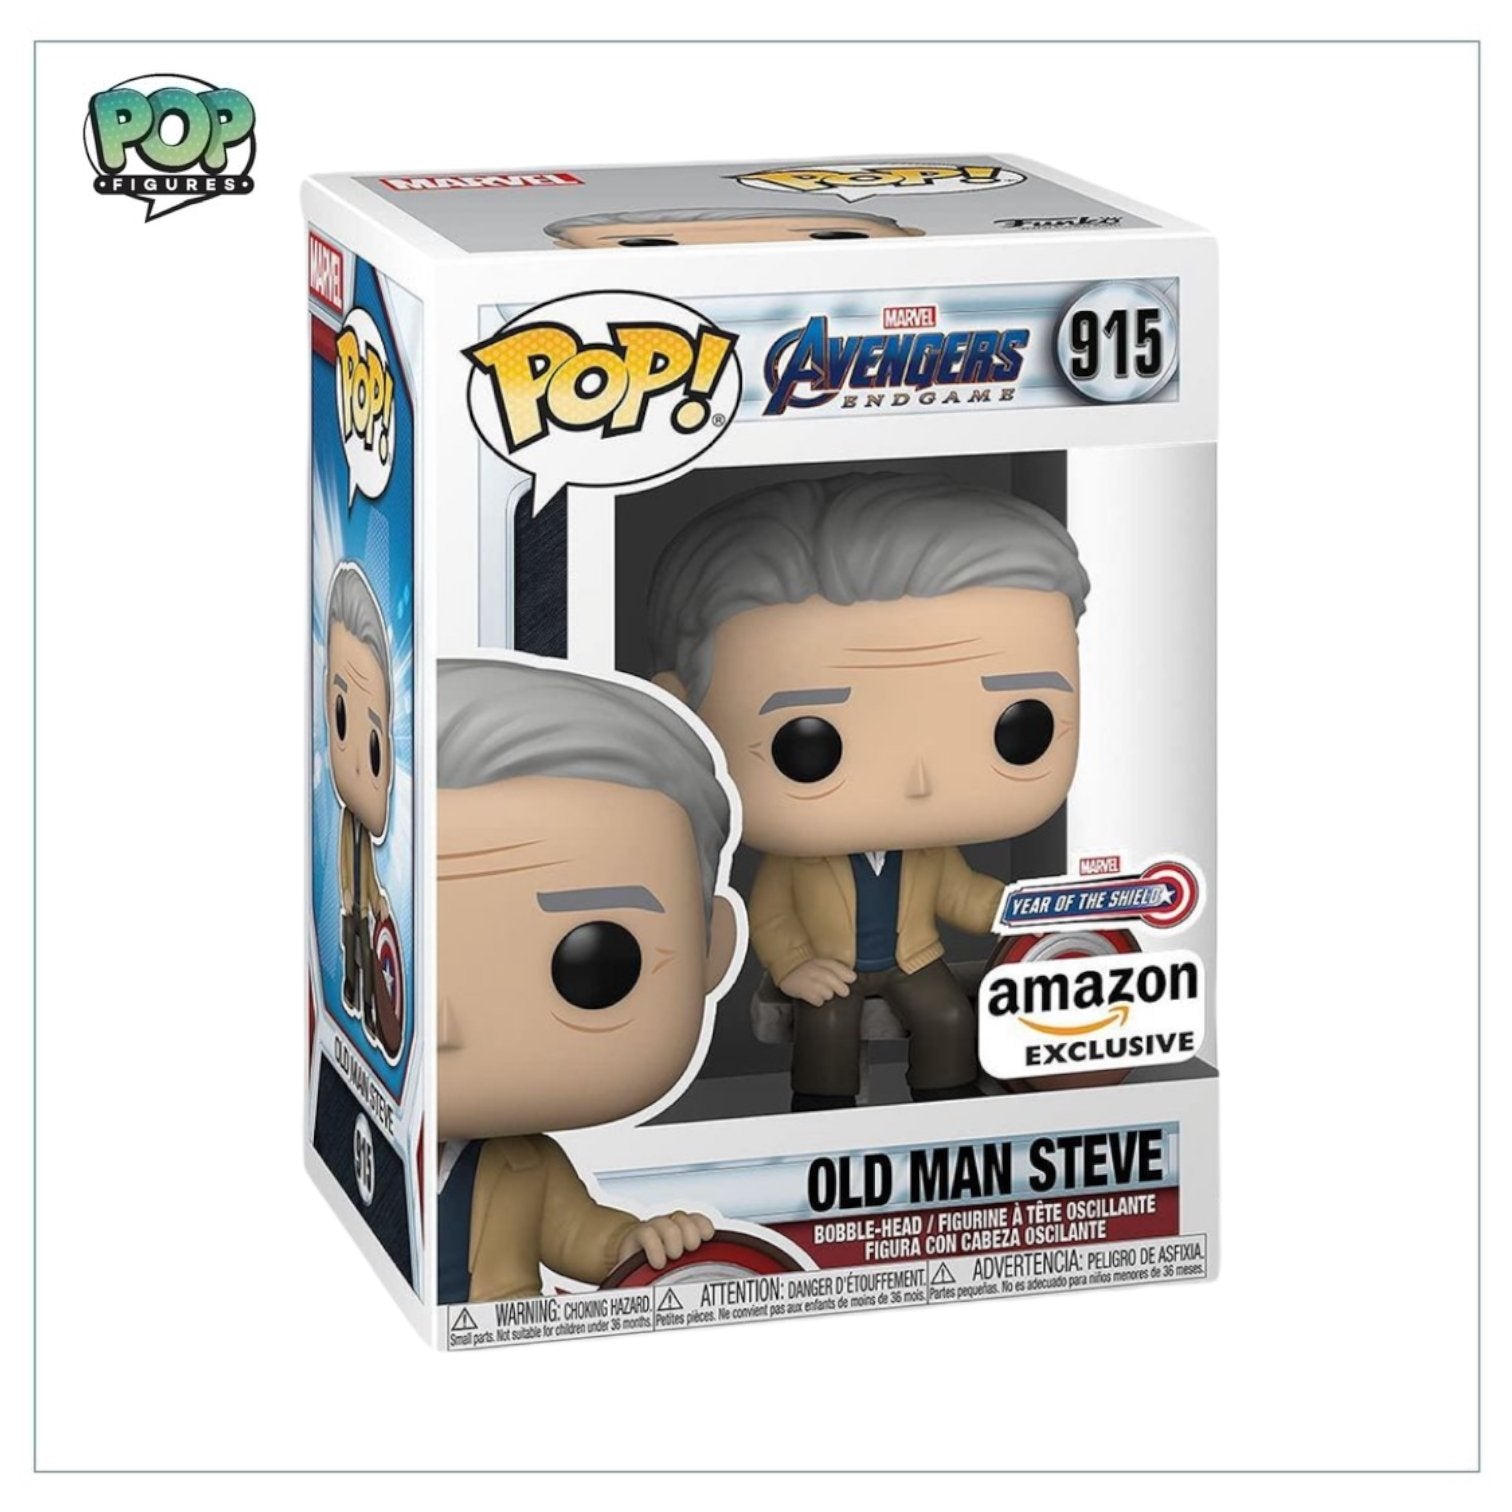 Old Man Steve #915 Funko Pop! Avengers Endgame - Amazon Exclusive - Angry Cat